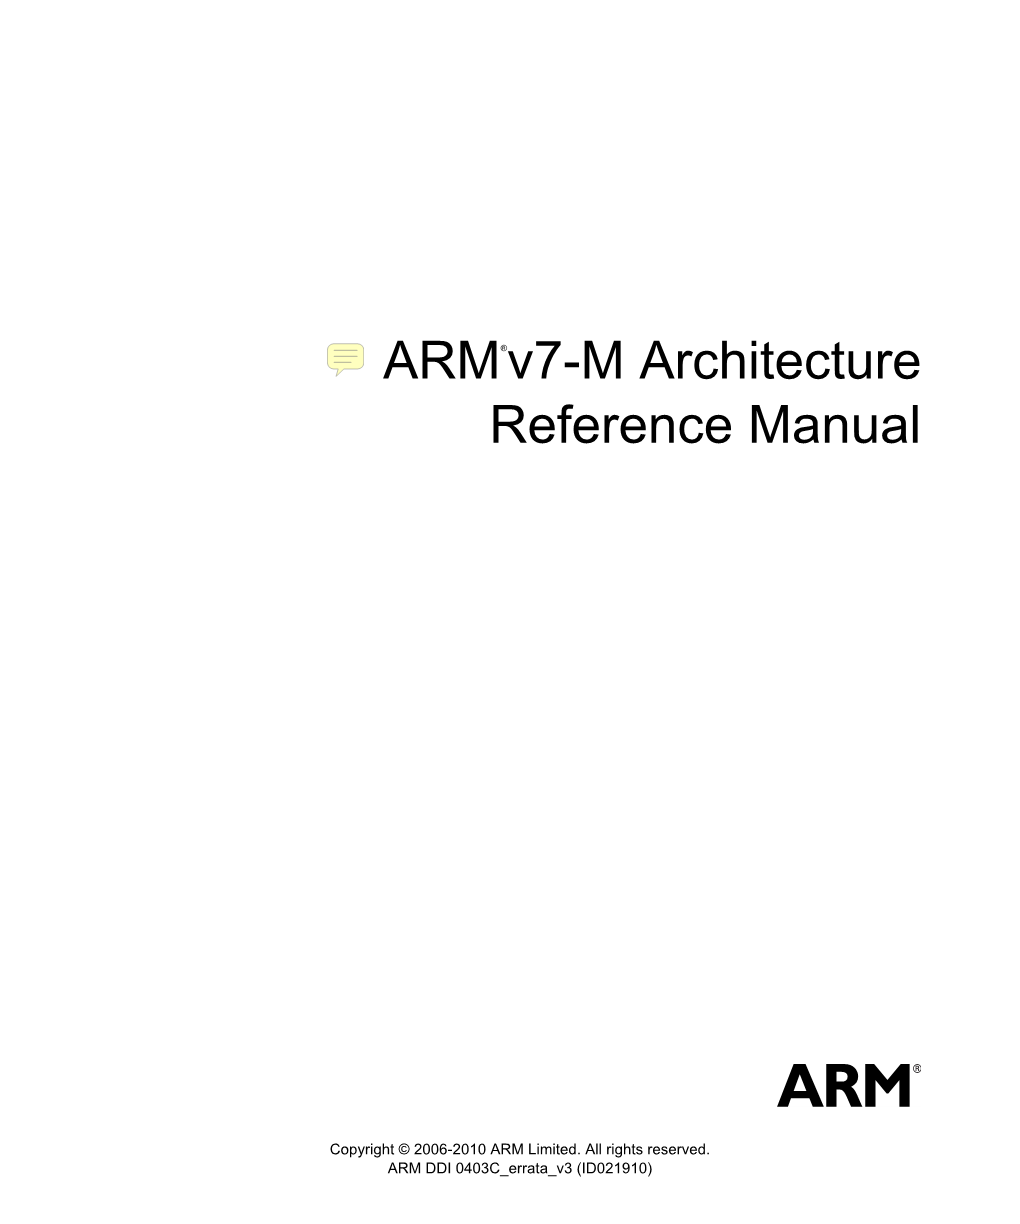 Armv7-M Architecture Reference Manual